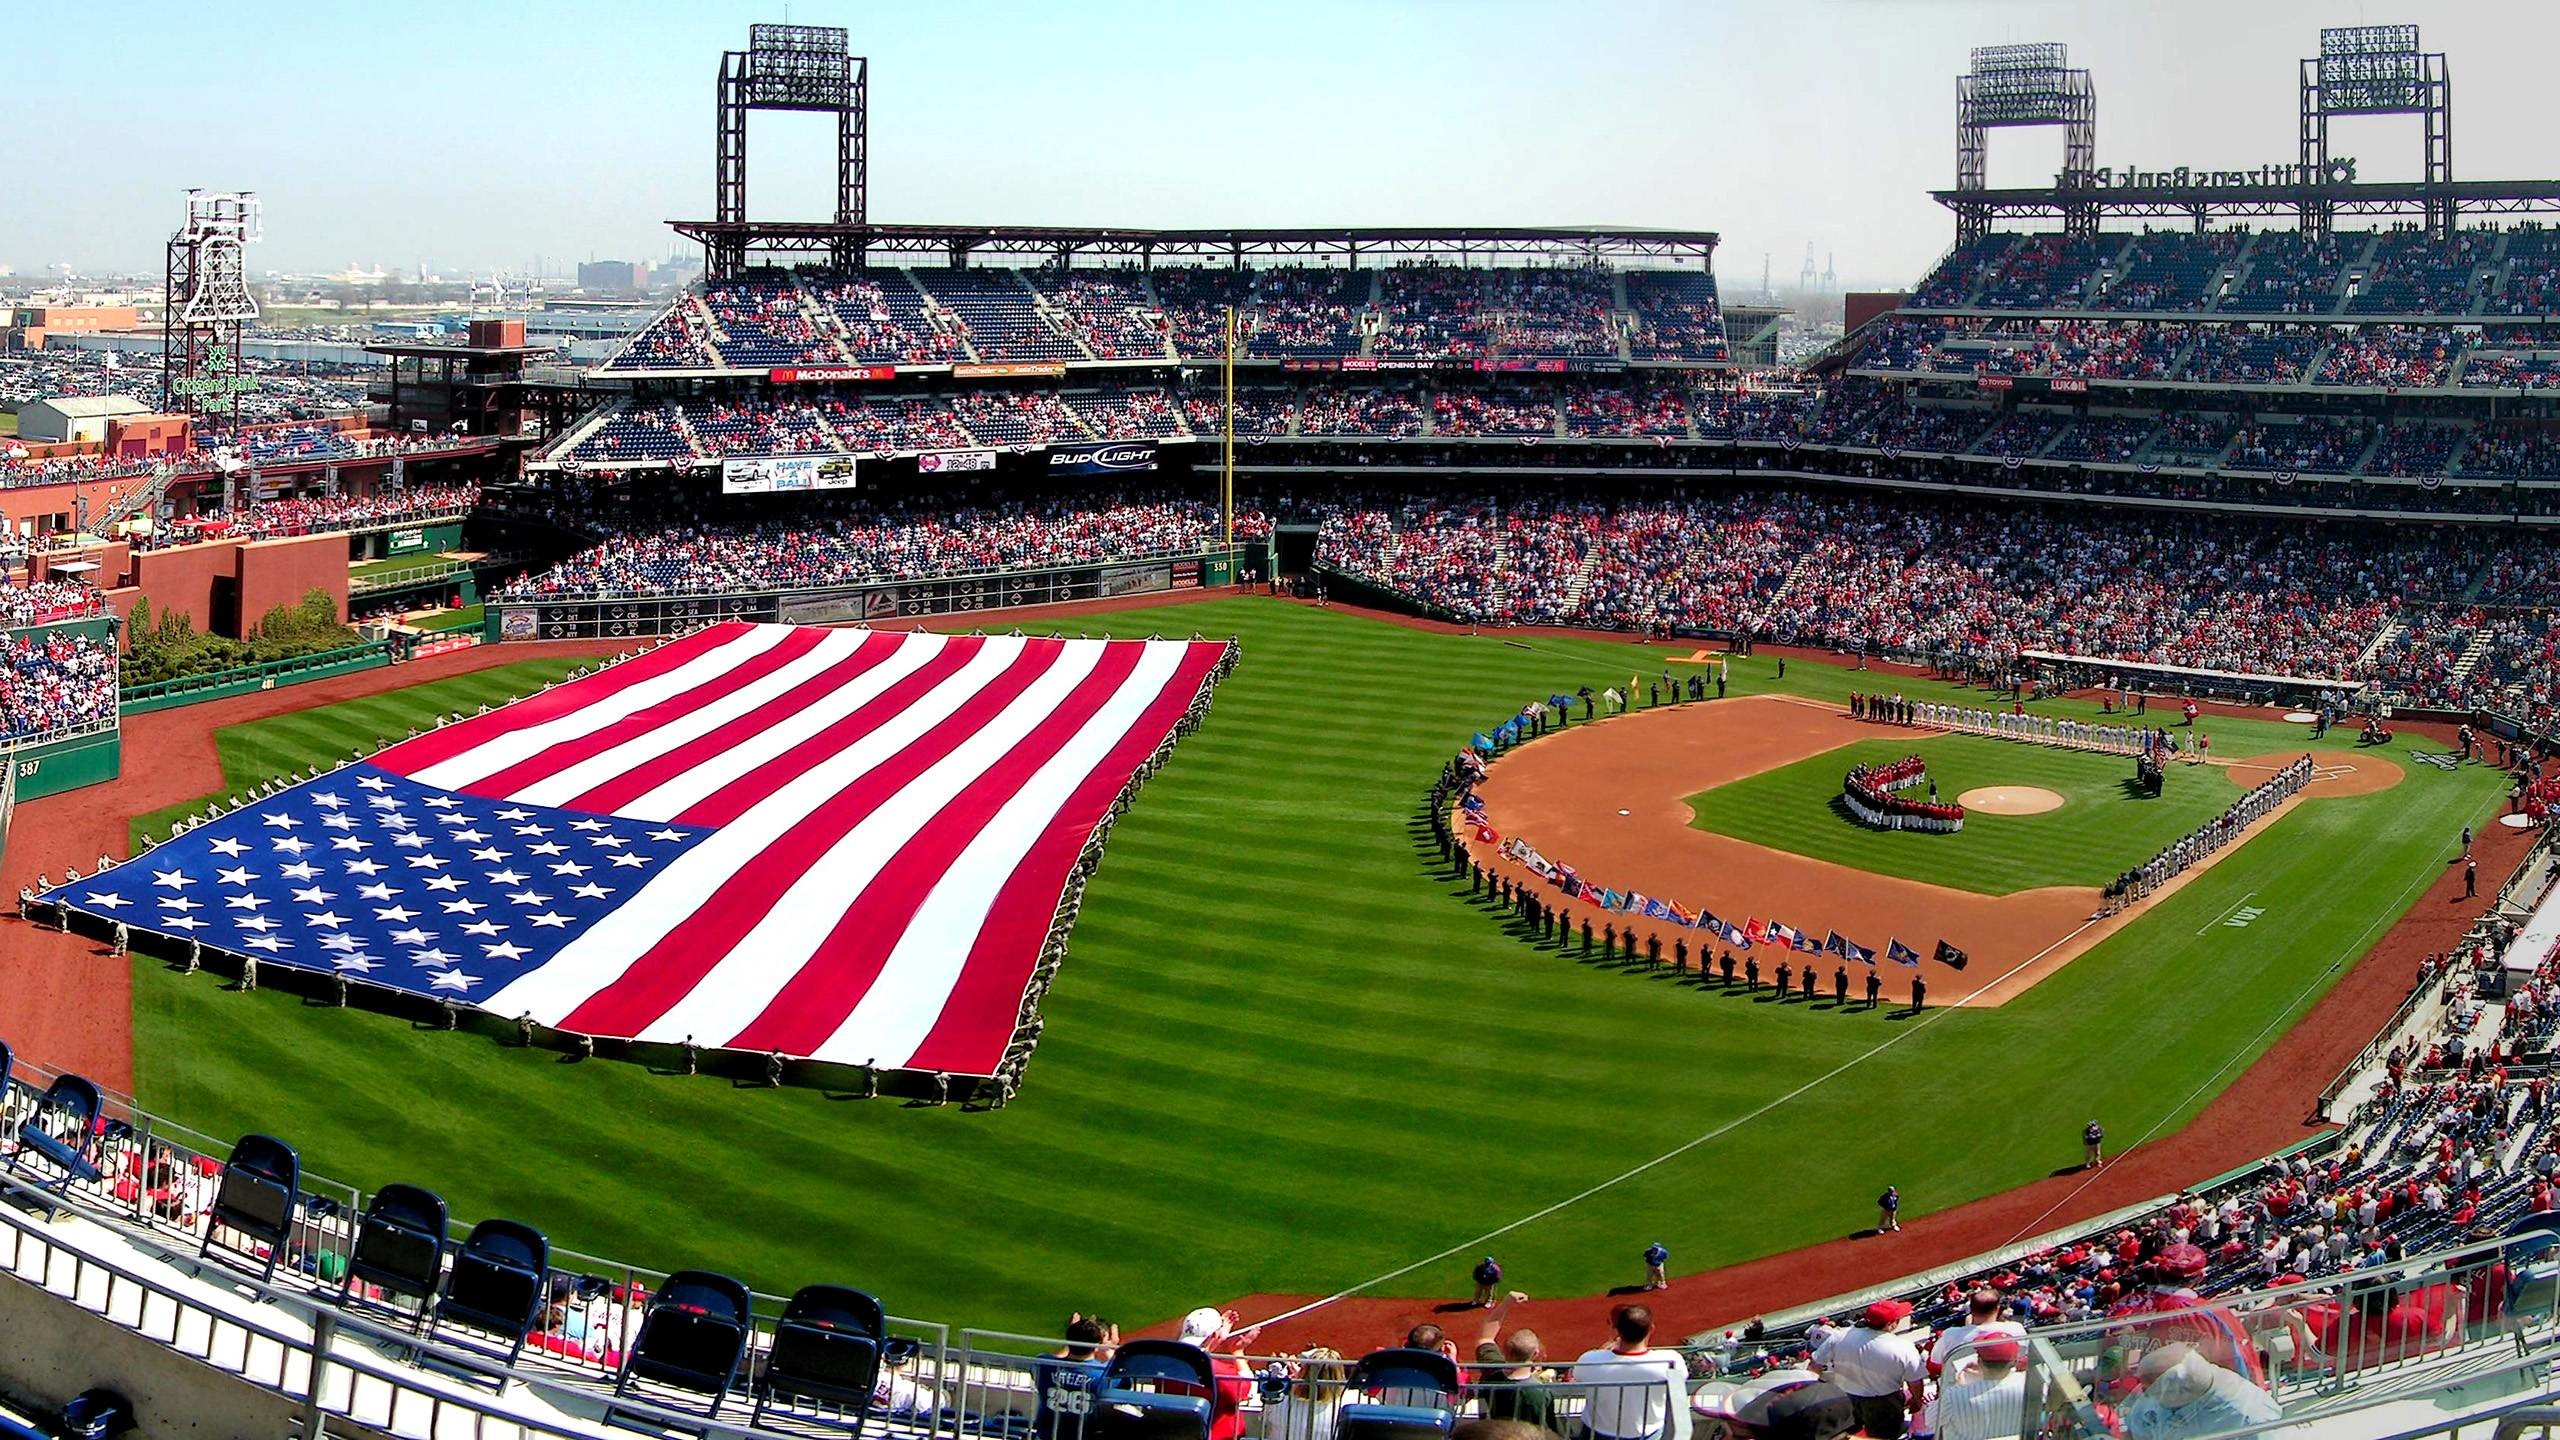 2560x1440 citizens bank park wallpaper 69 entries in Phillies Wallpapers group